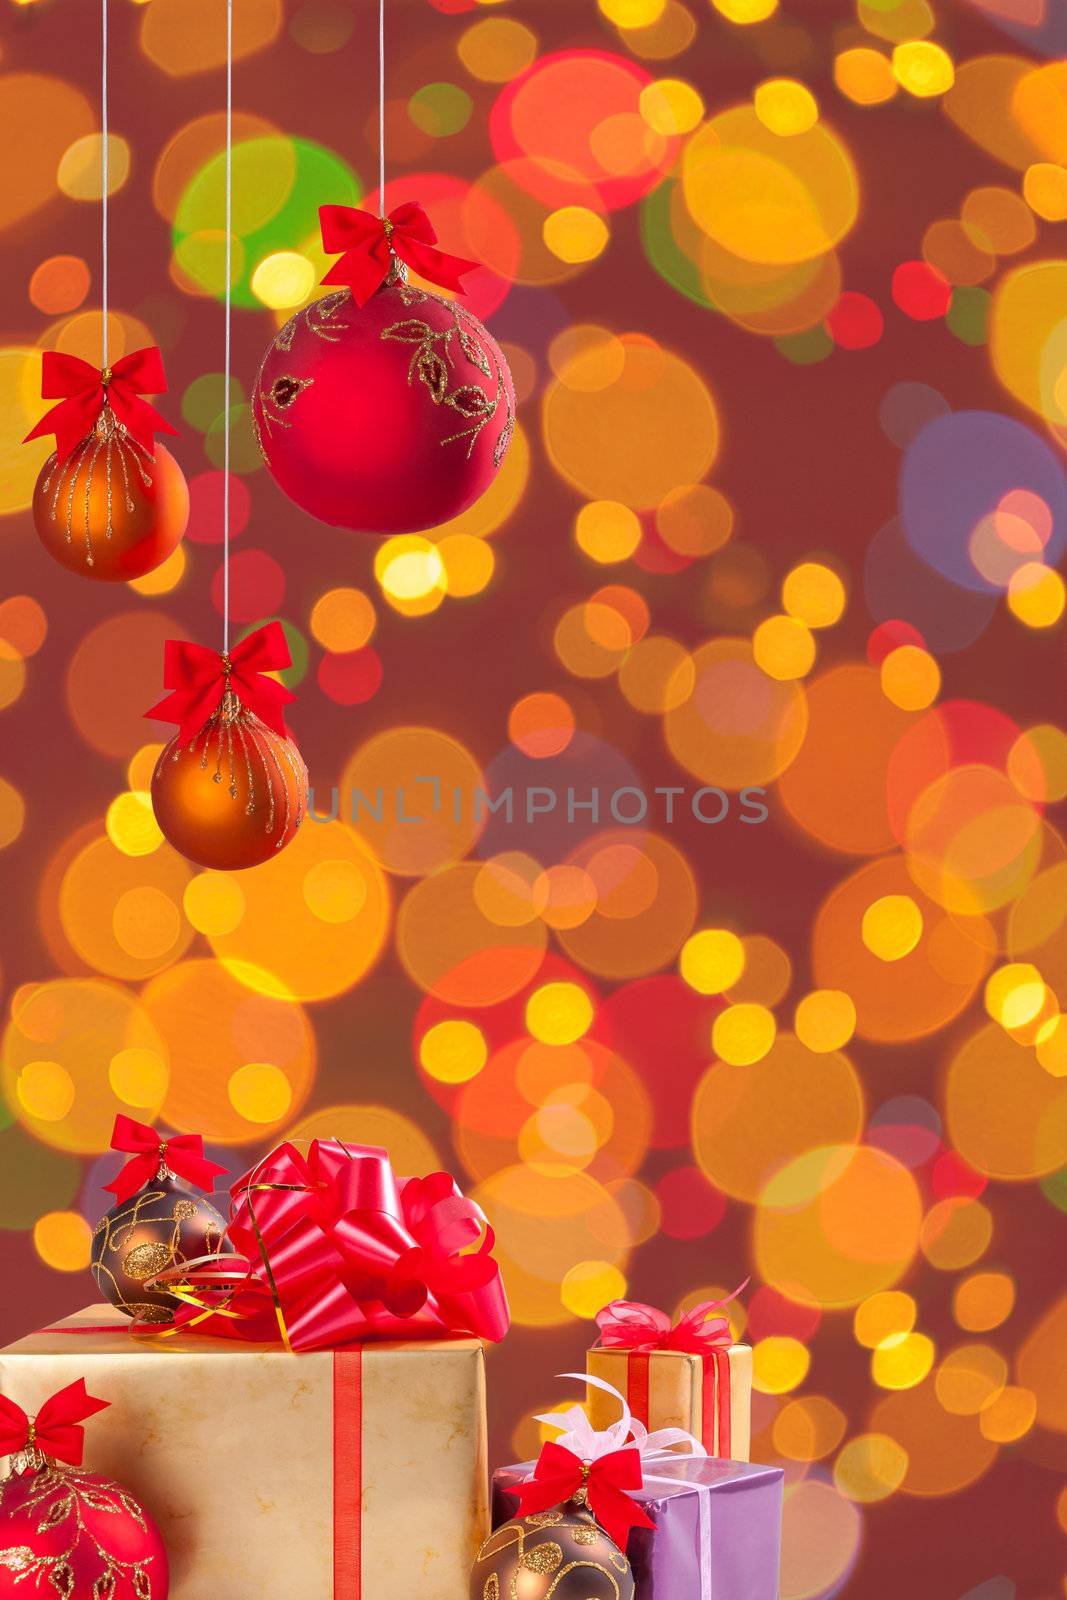 Gifts and cristmas balls on ribbon on festive background